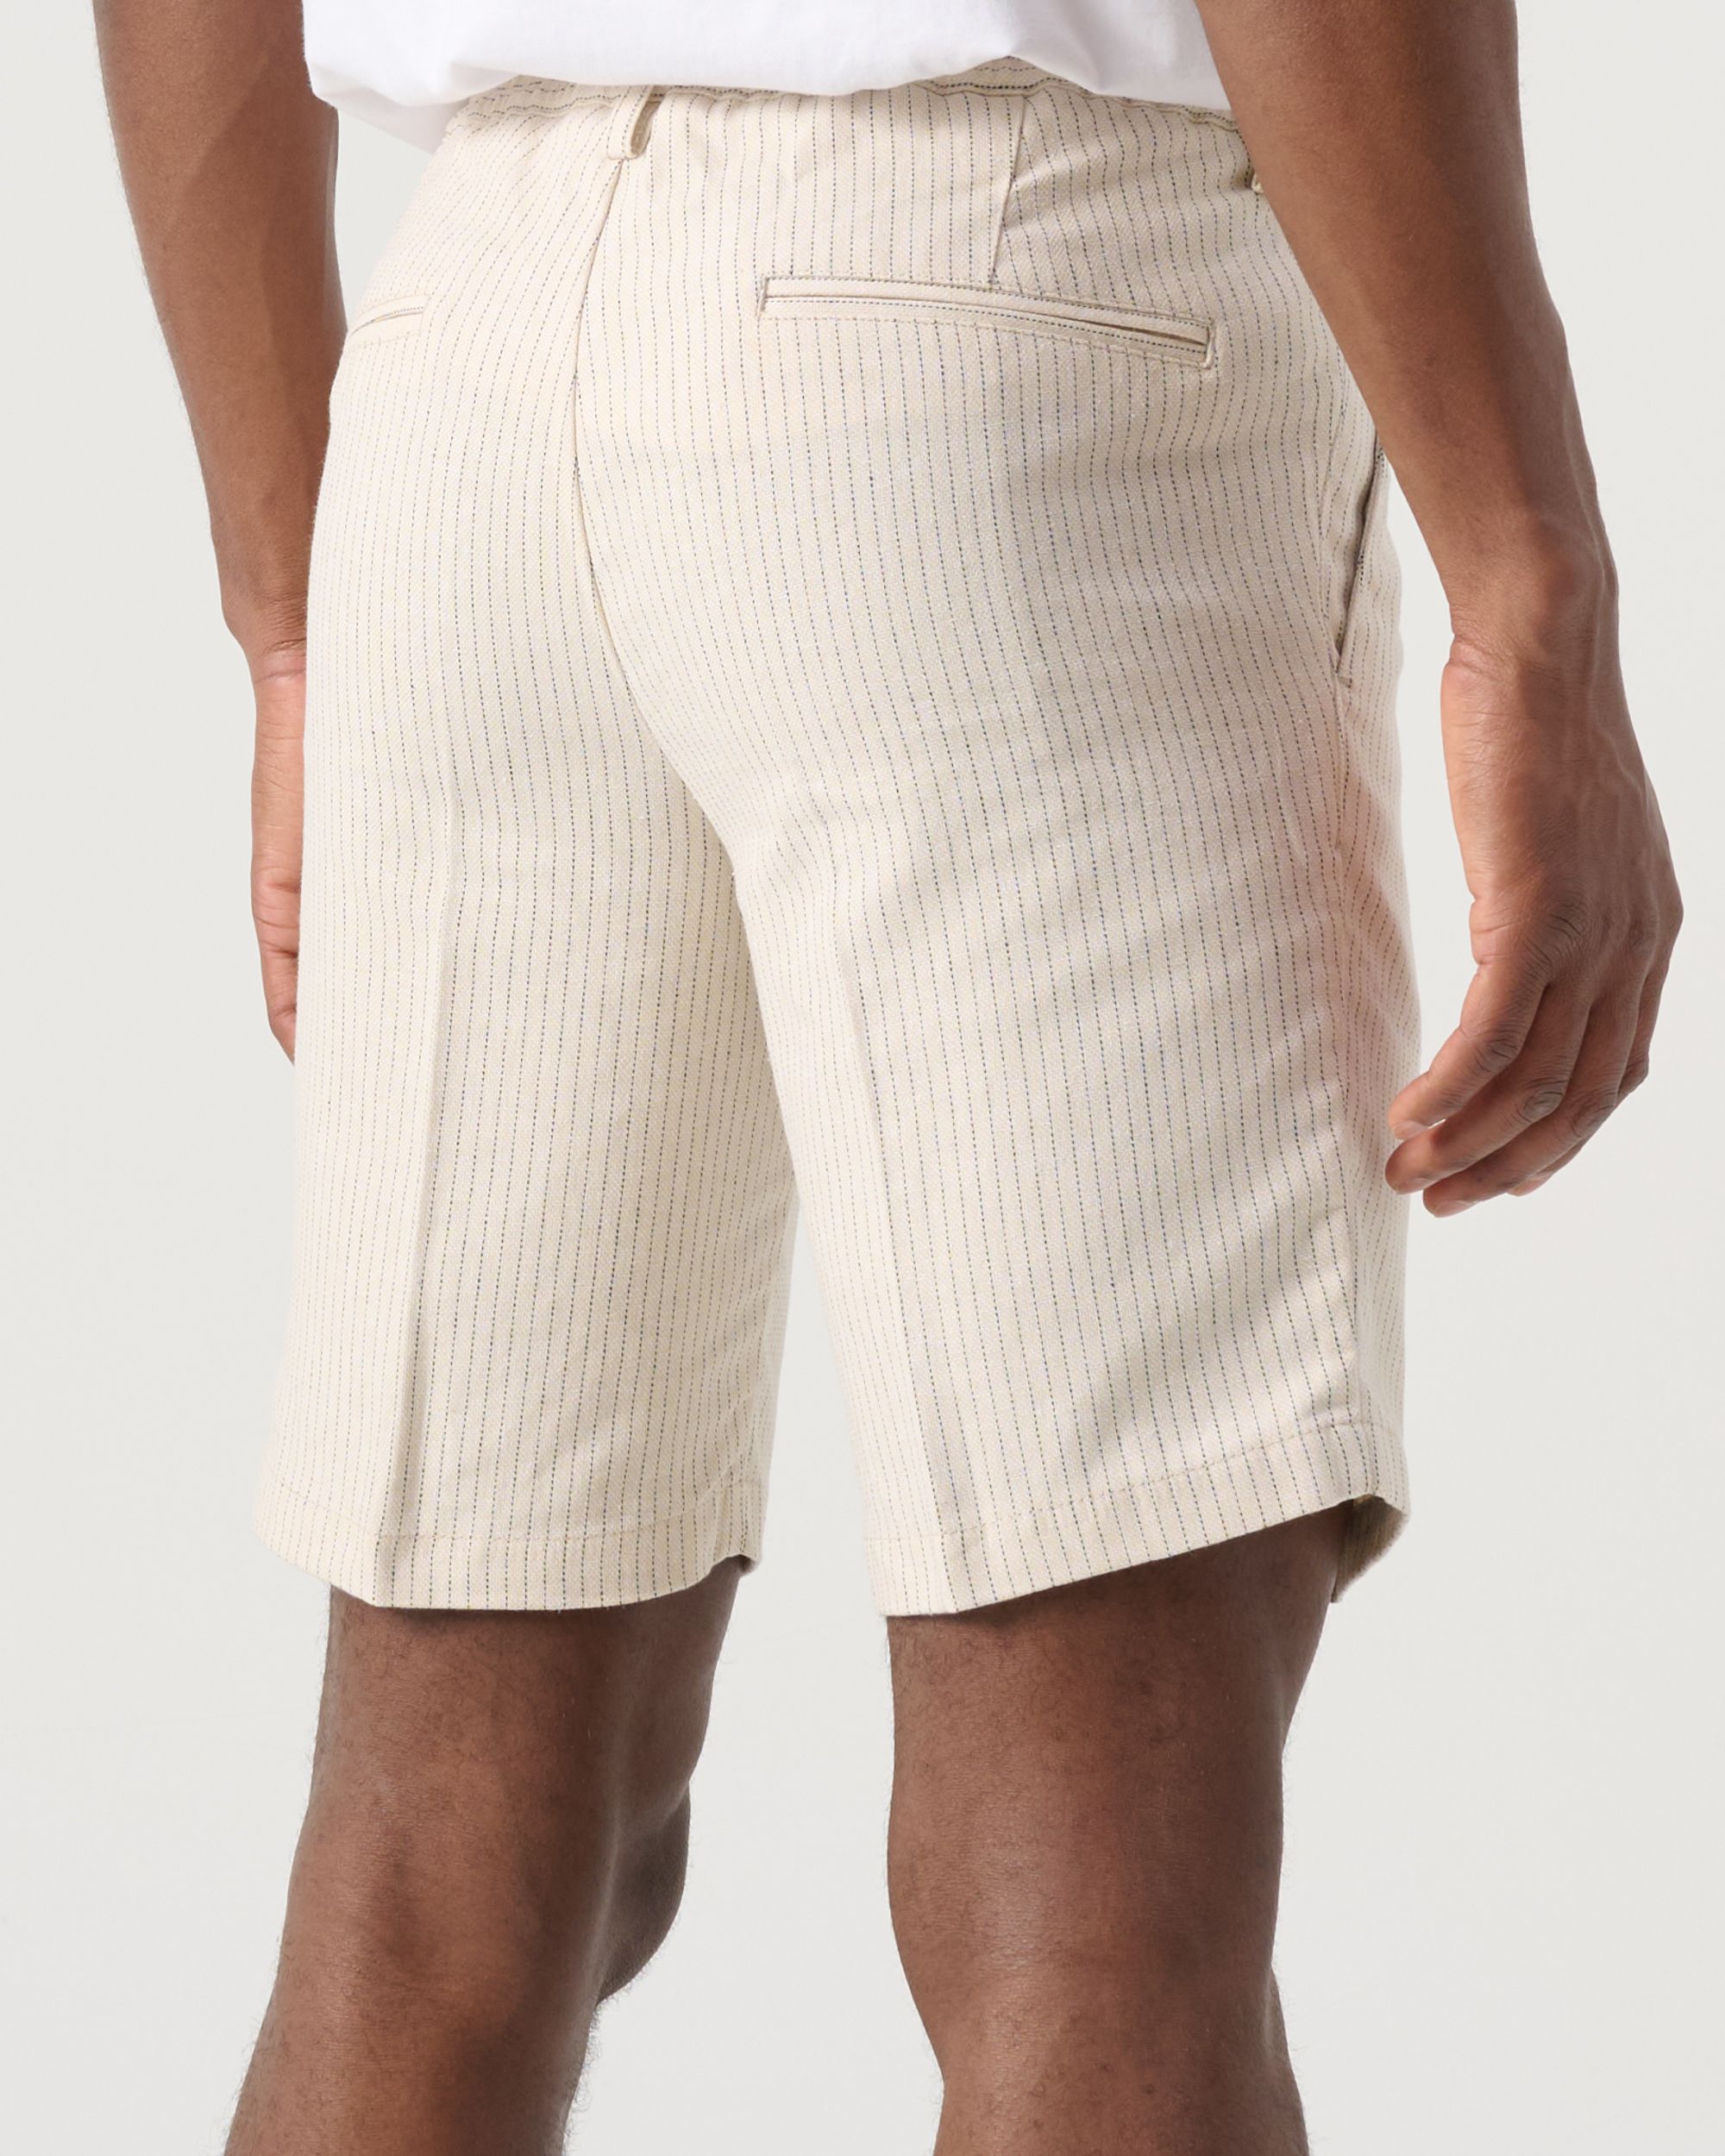 Profuomo Short Donker rood 094181-001-48